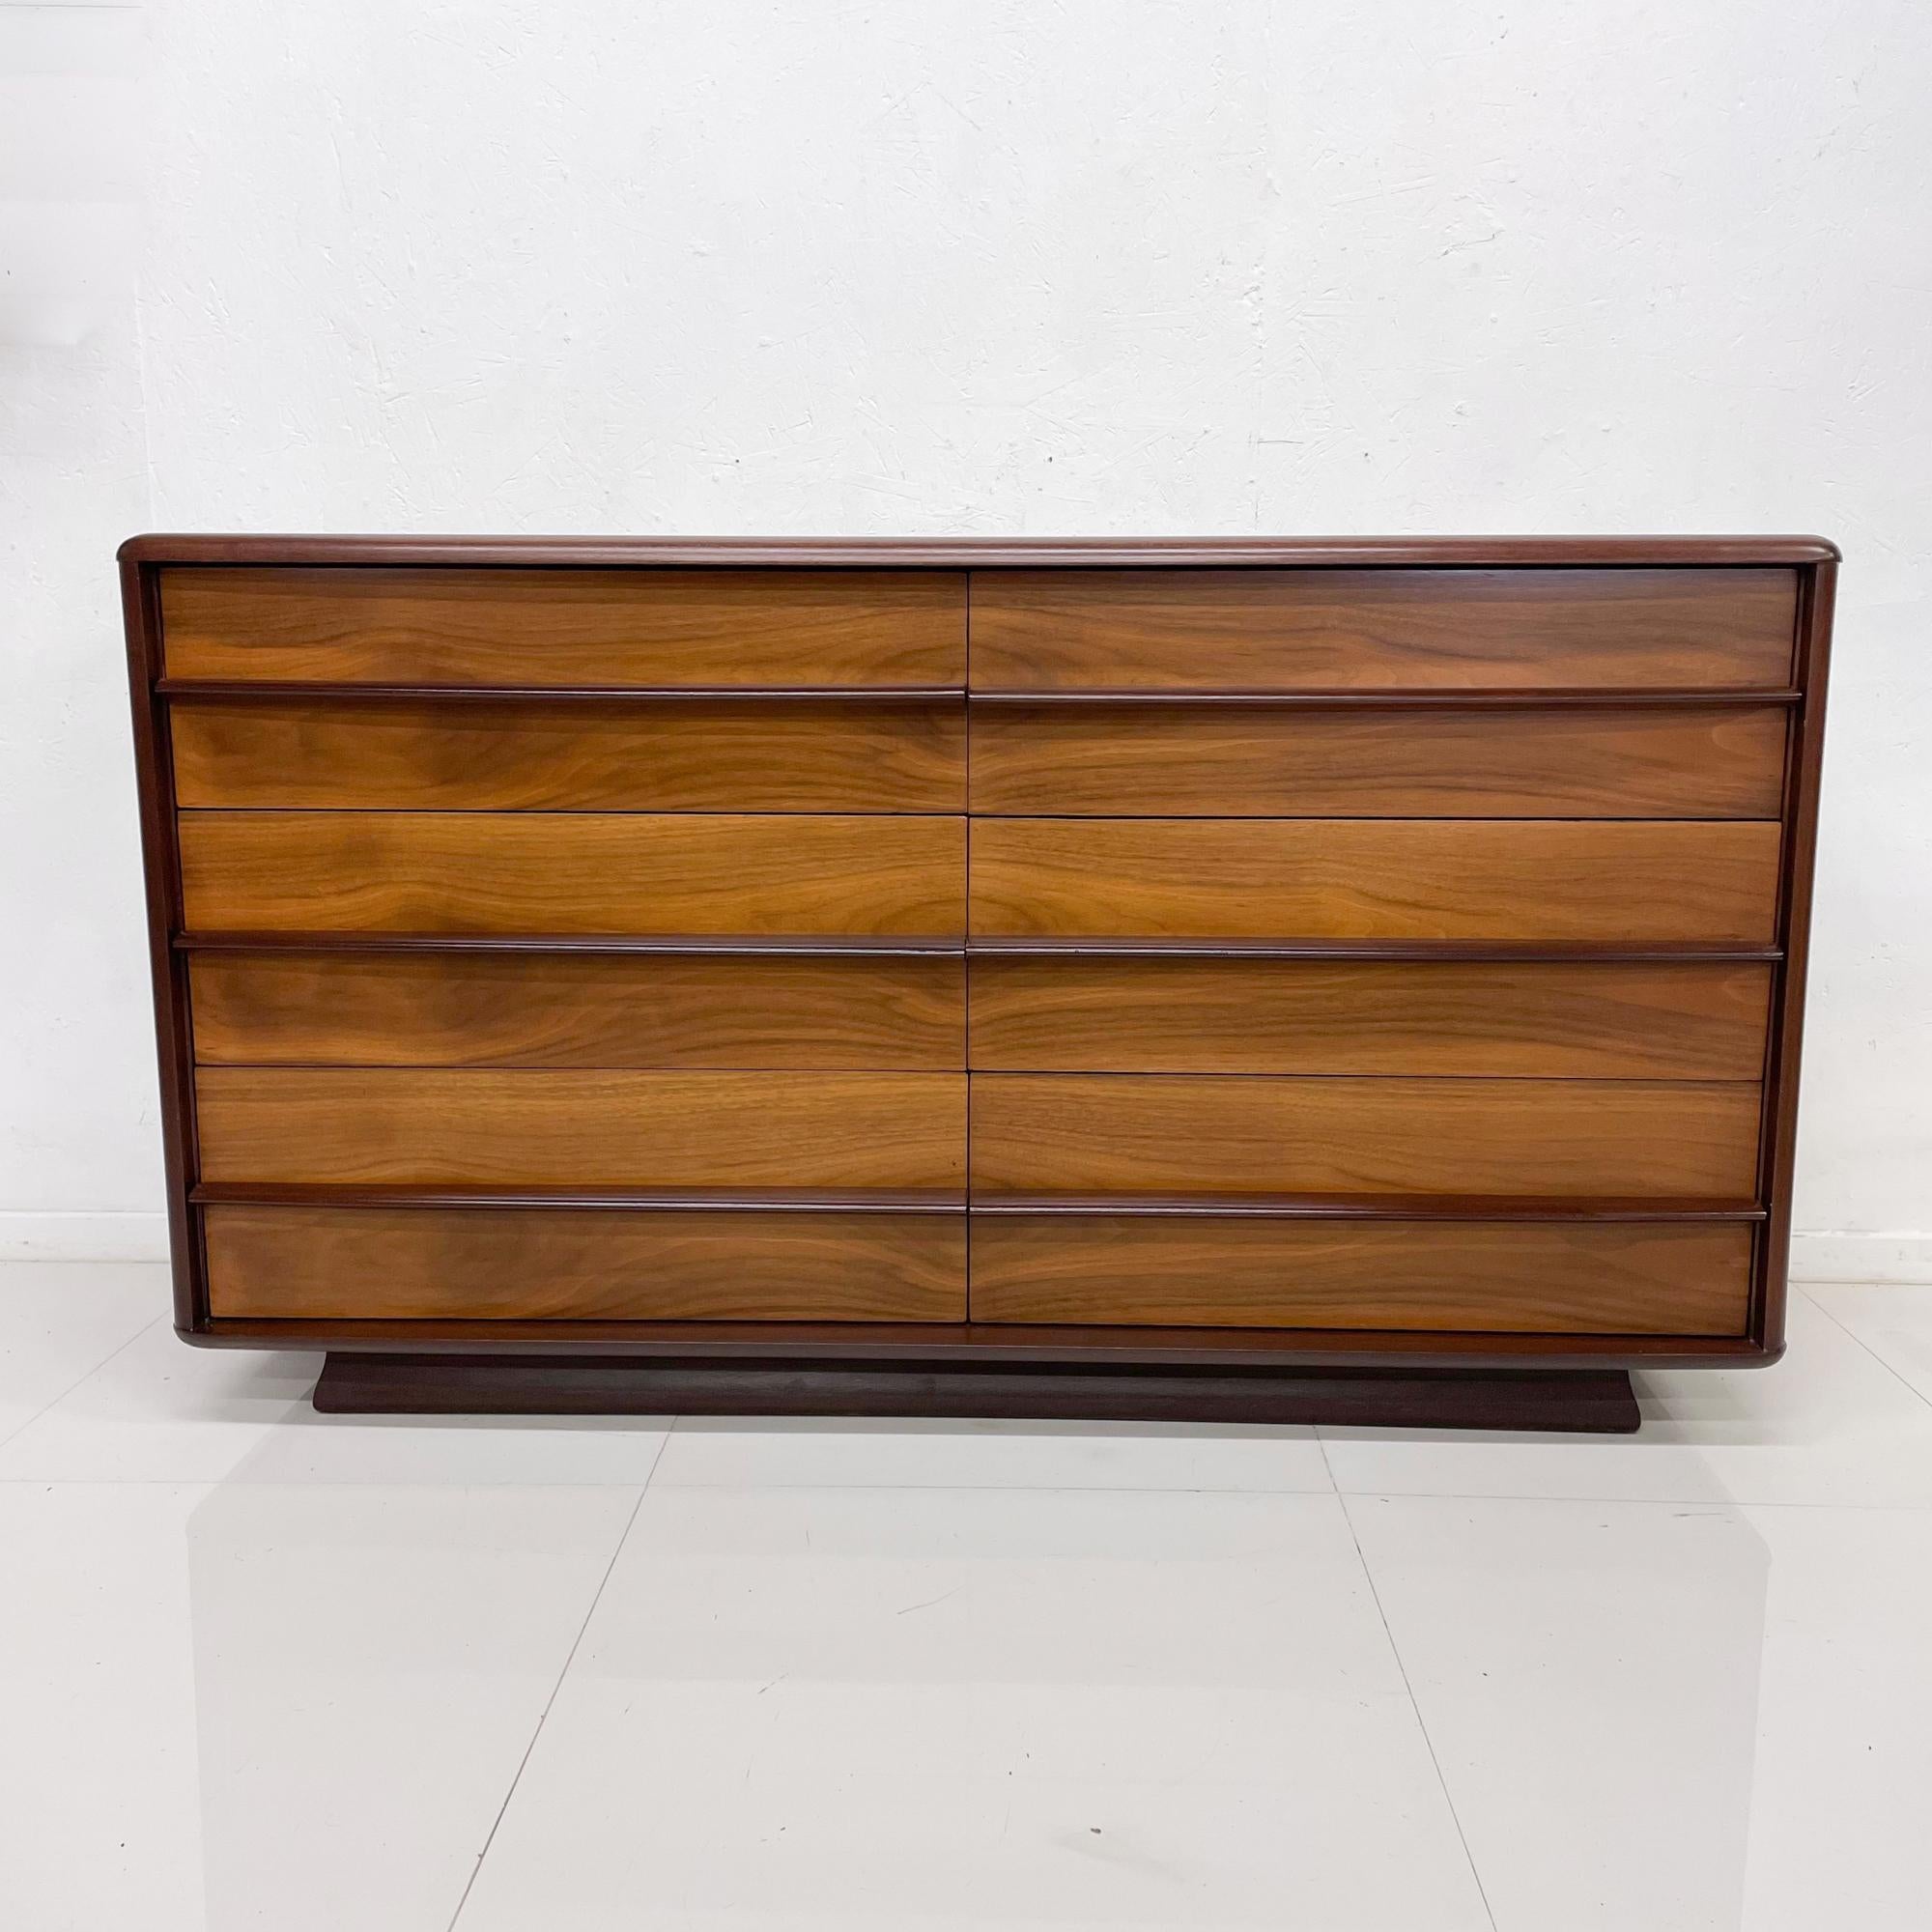 Dresser
Mid-Century Modern double dresser by Kent Coffey, line is Arcadia. USA 1960s.
Walnut wood with sculptural wood handles. Double tone walnut wood. 
Measures: 32 H x 58 W x 19 D drawer 26 x 14.5 d x 7.5 H
Preowned vintage condition